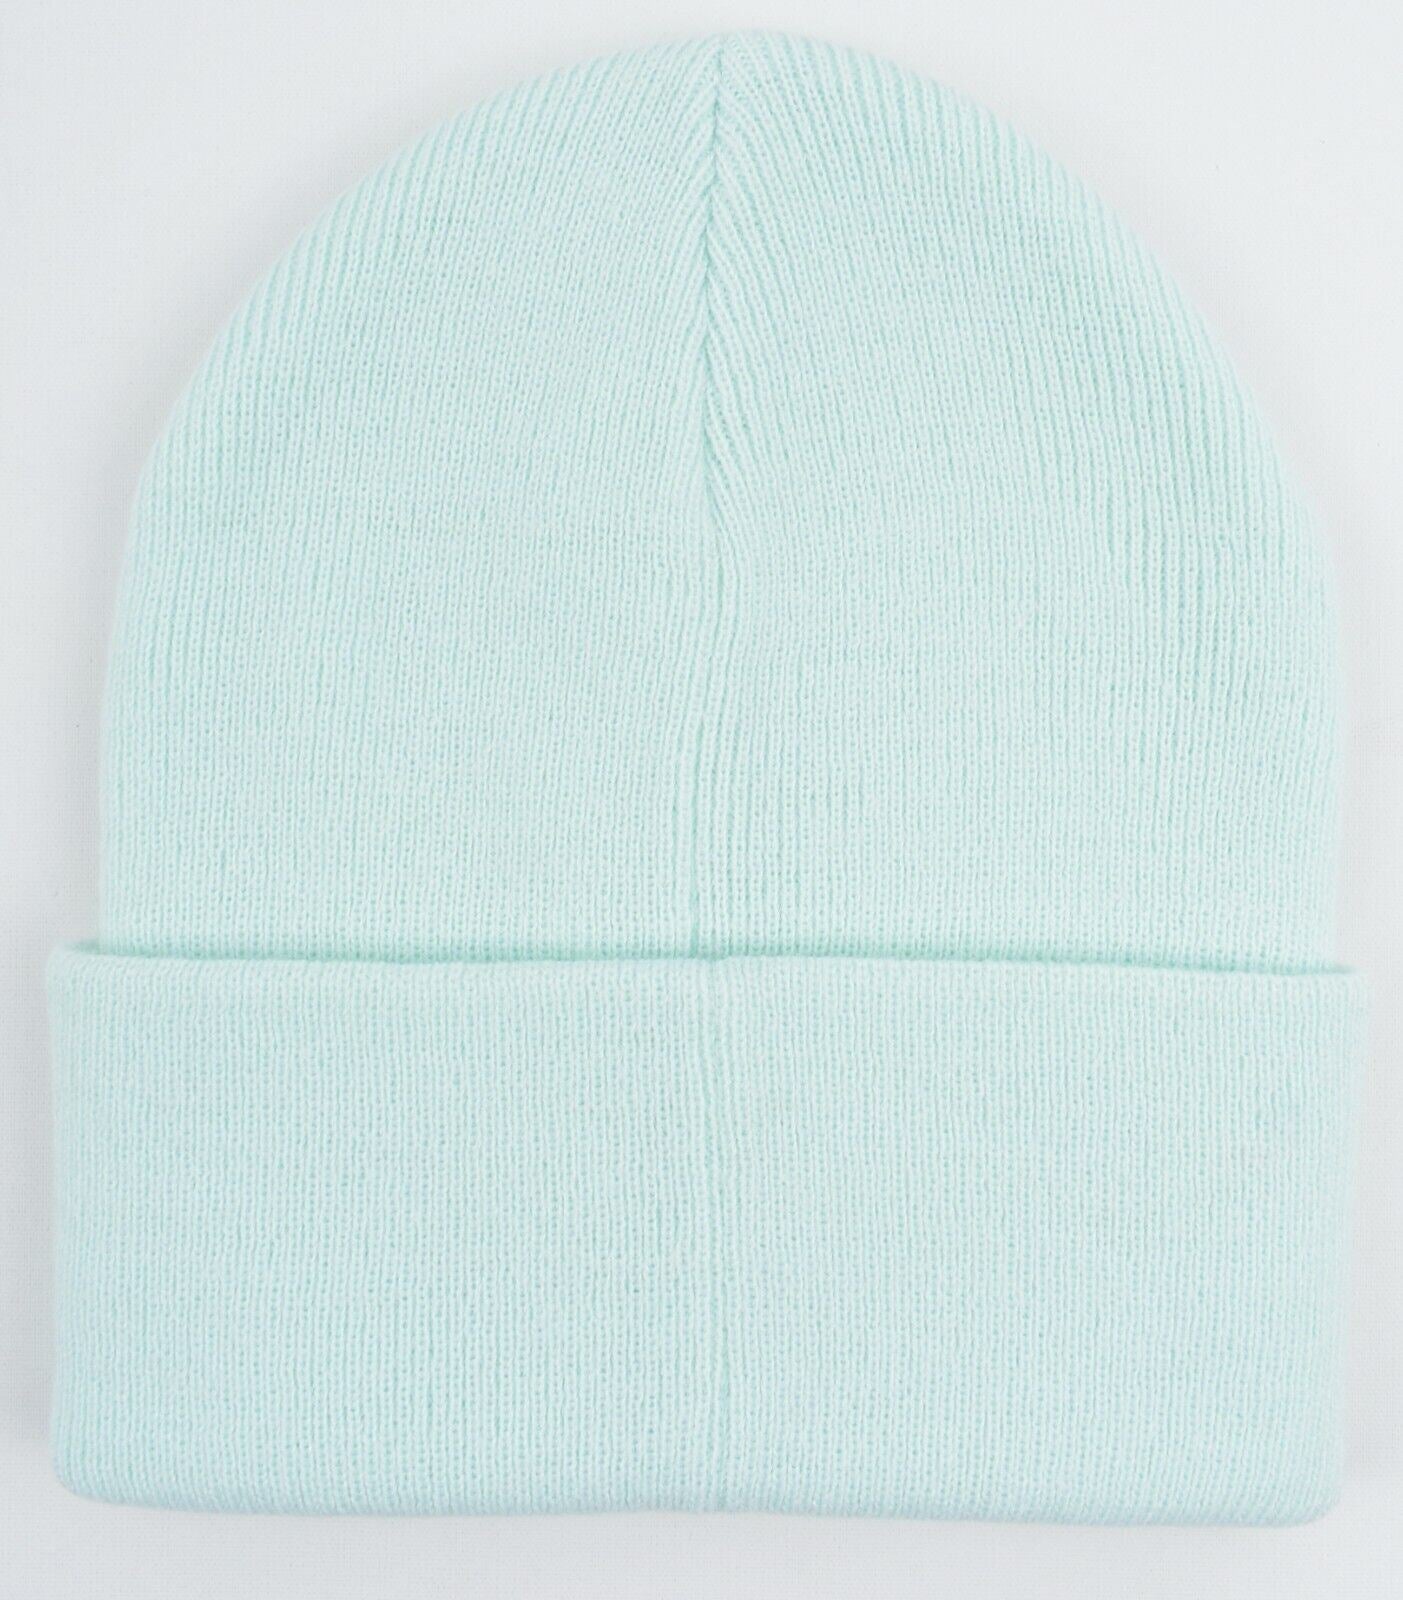 UNDER ARMOUR Men's HALF TIME Knitted Beanie Hat, Mint Green, One Size